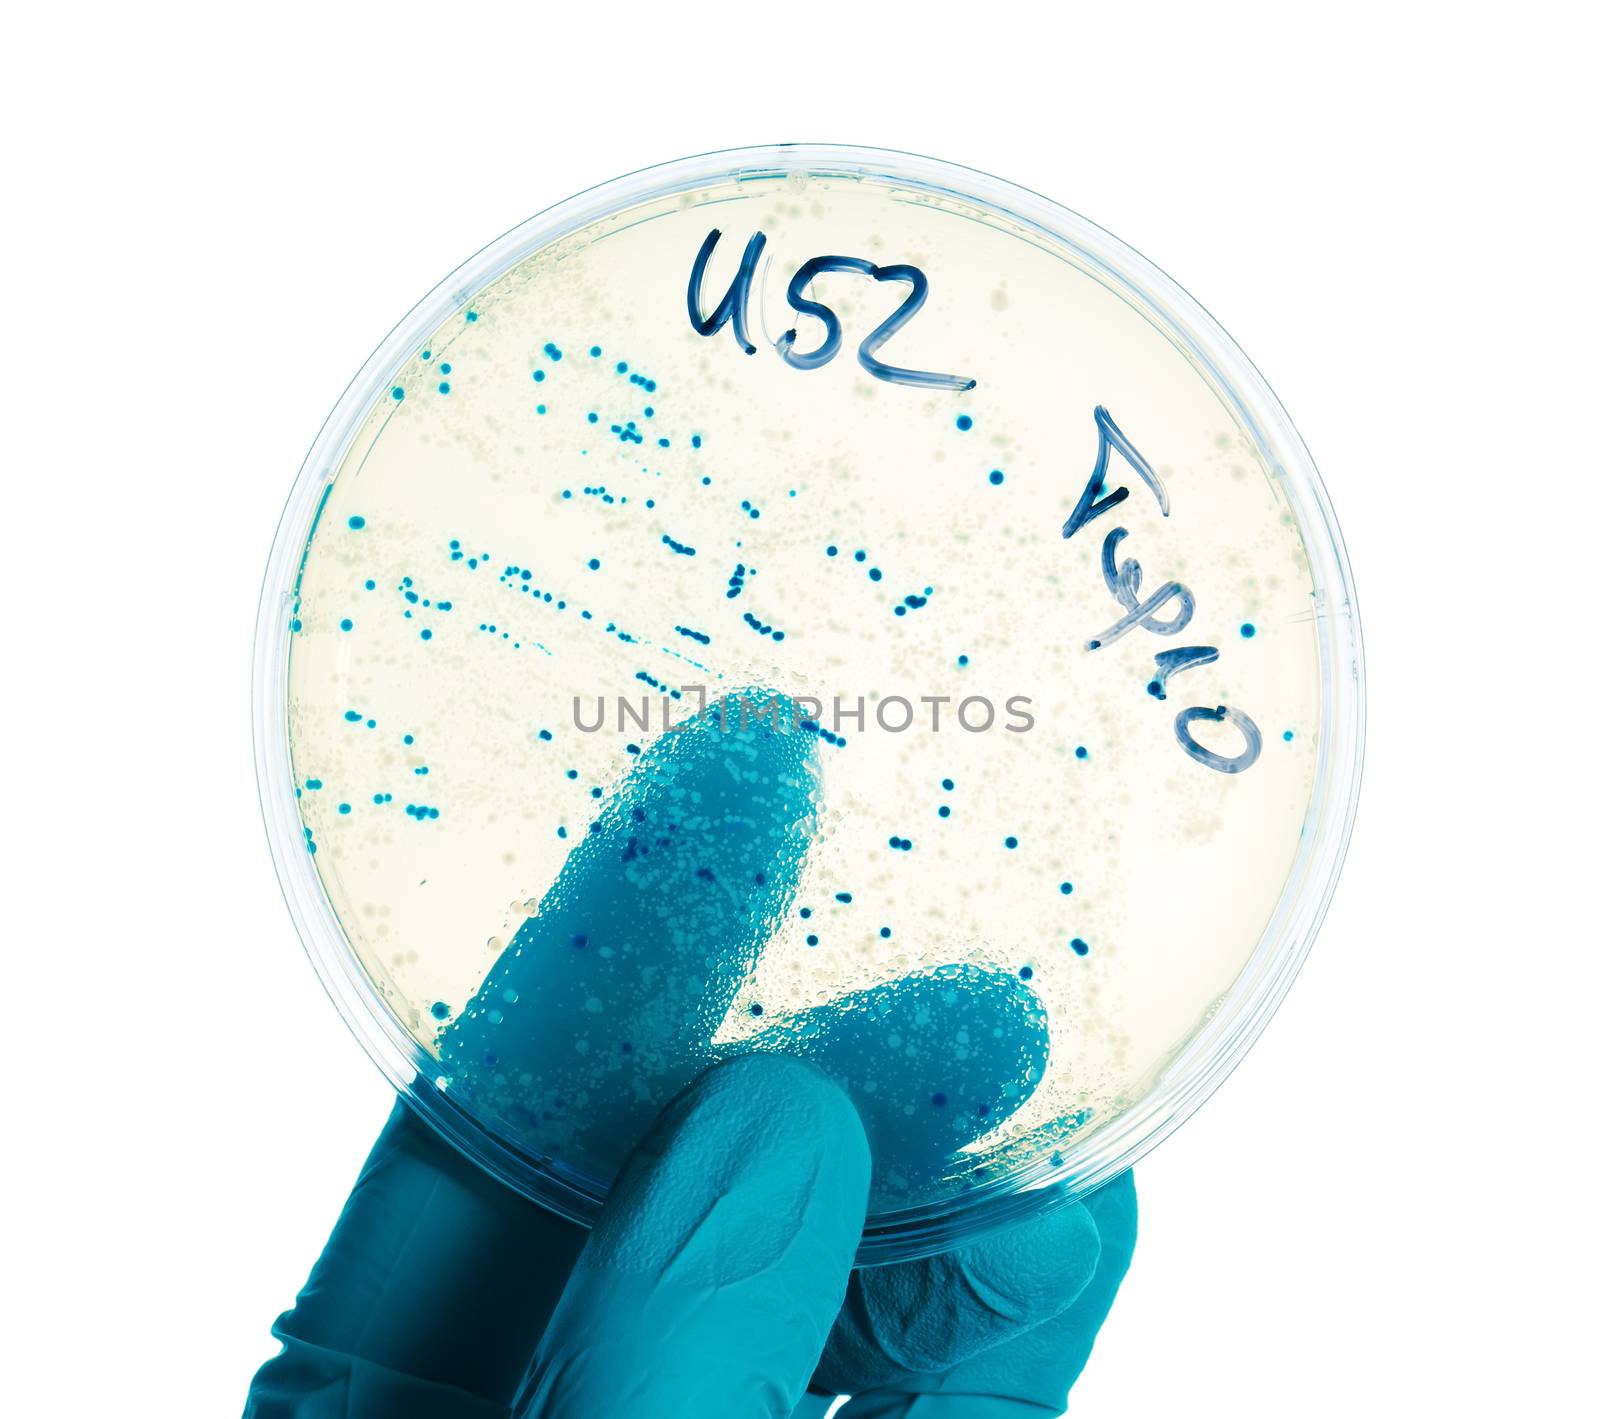 Hand in nitril glove holds Petri dish with bacterial colonies